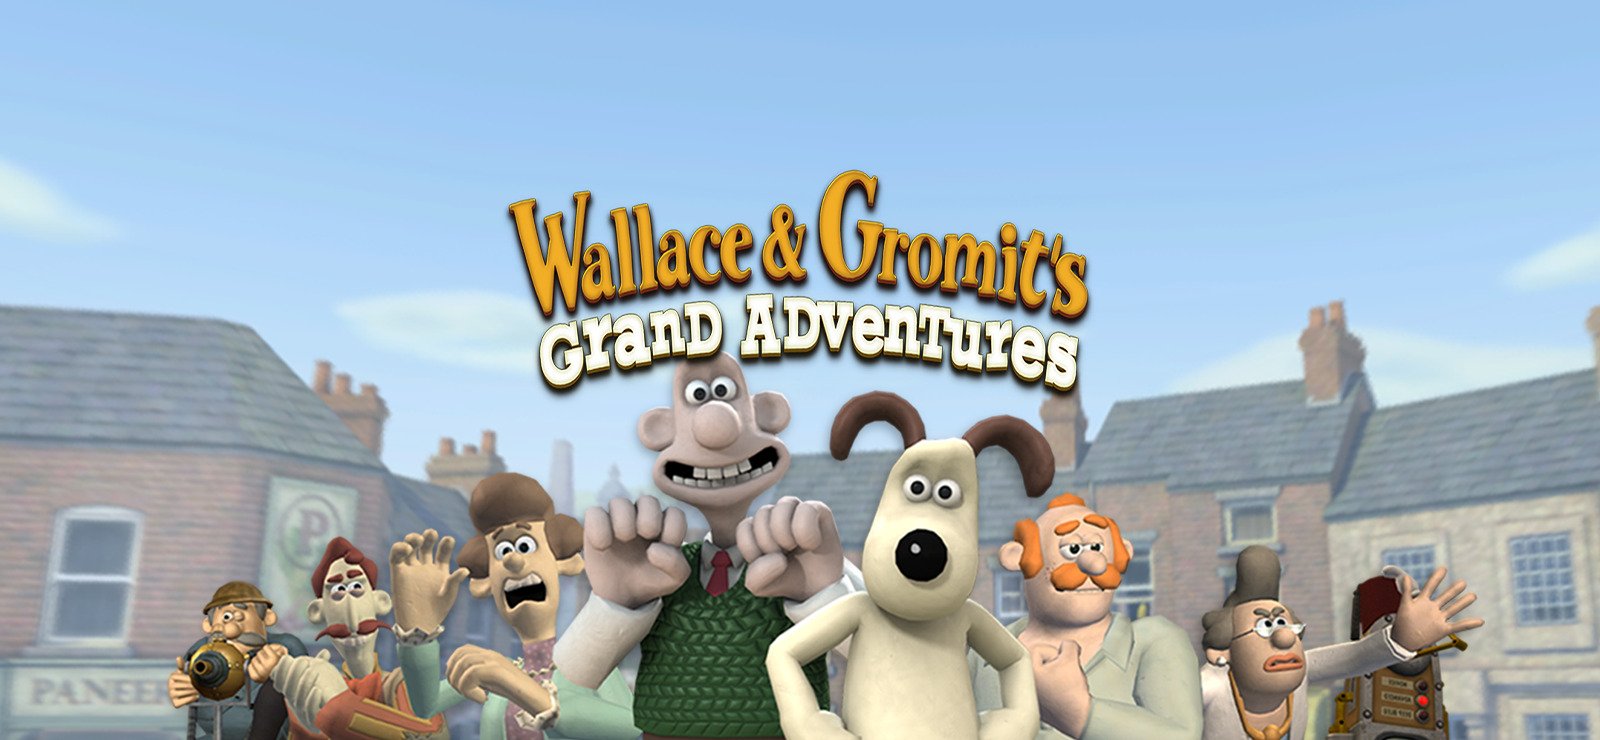 Wallace & Gromit’s Grand Adventures 10